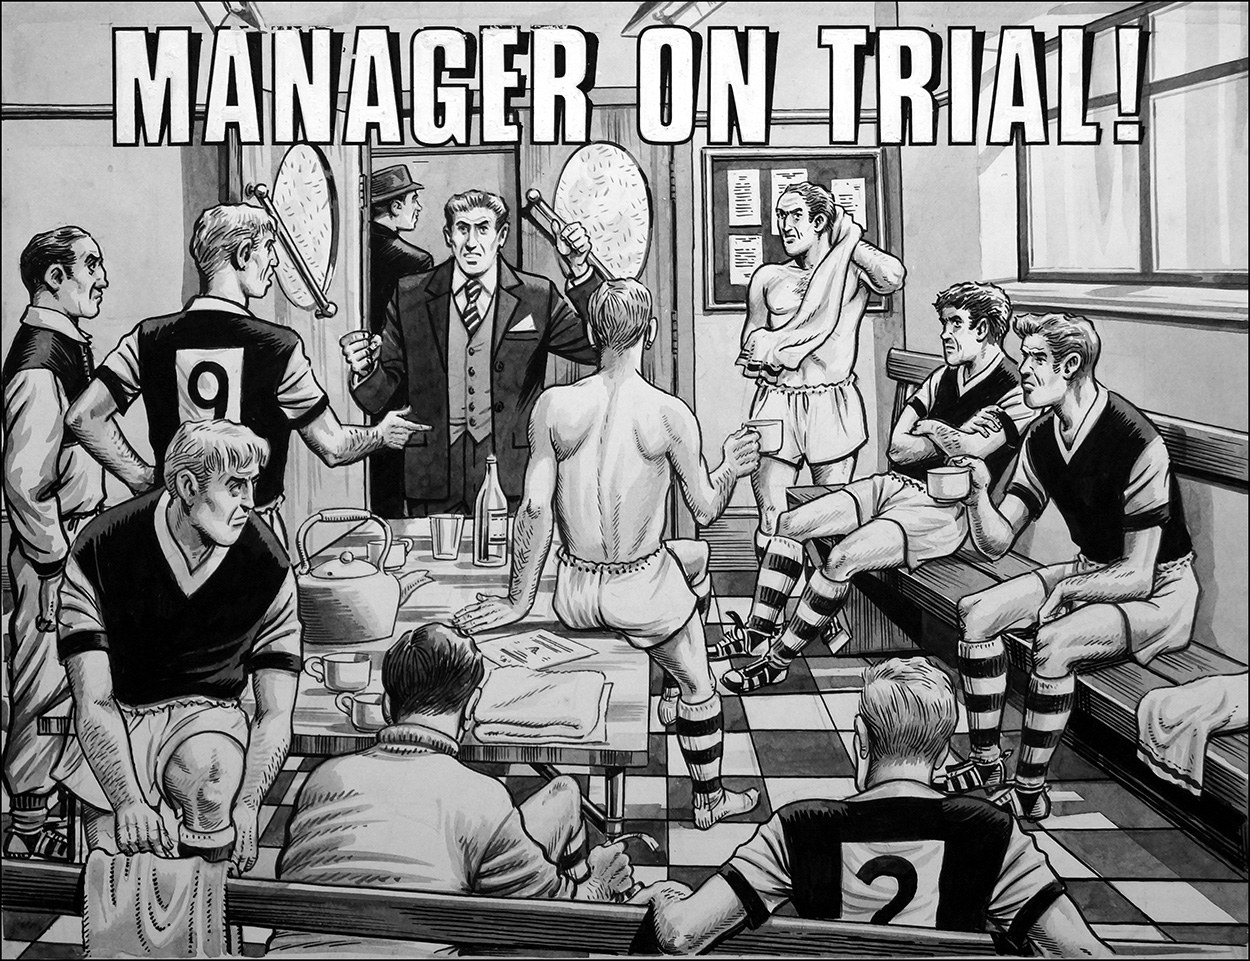 Manager On Trial - Football Story (TWO illustrations) (Originals) art by Bert Vandeput at The Illustration Art Gallery